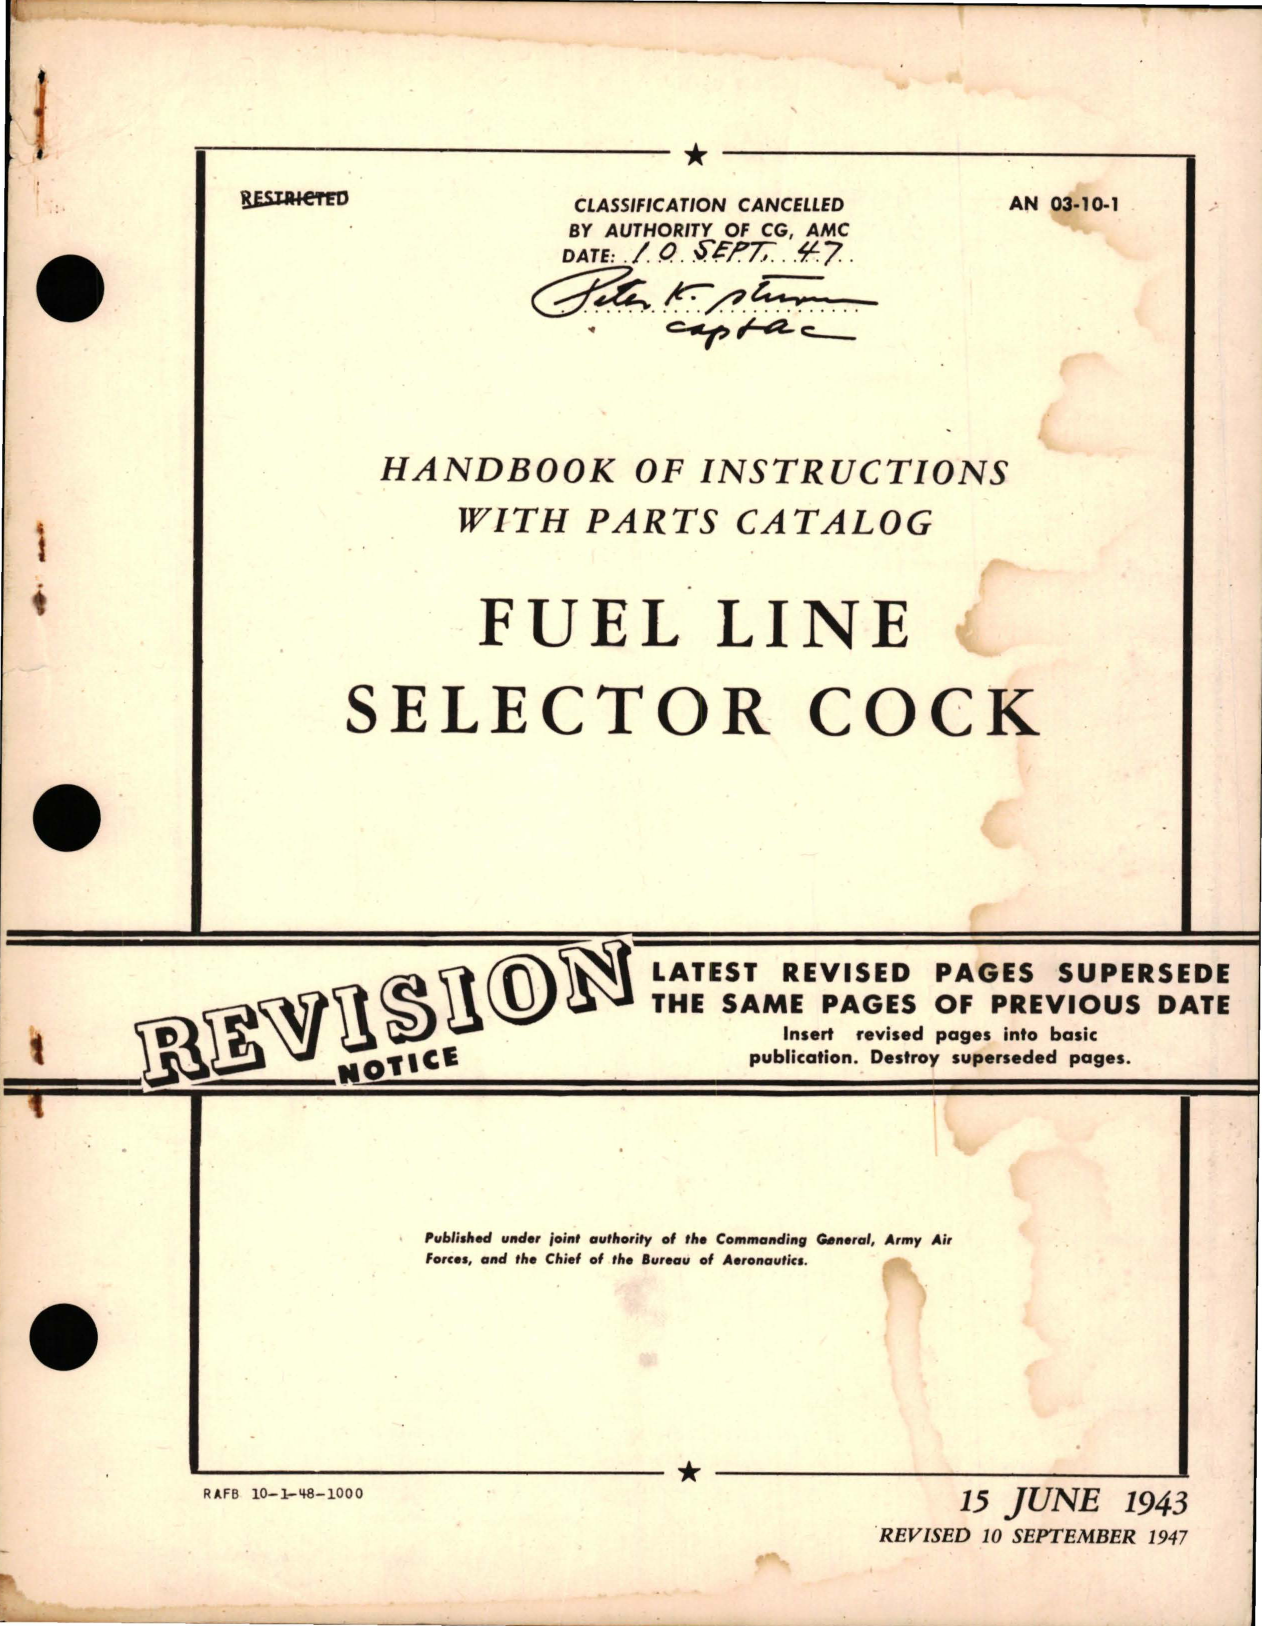 Sample page 1 from AirCorps Library document: Parts Catalog for Fuel Line Selector Cock